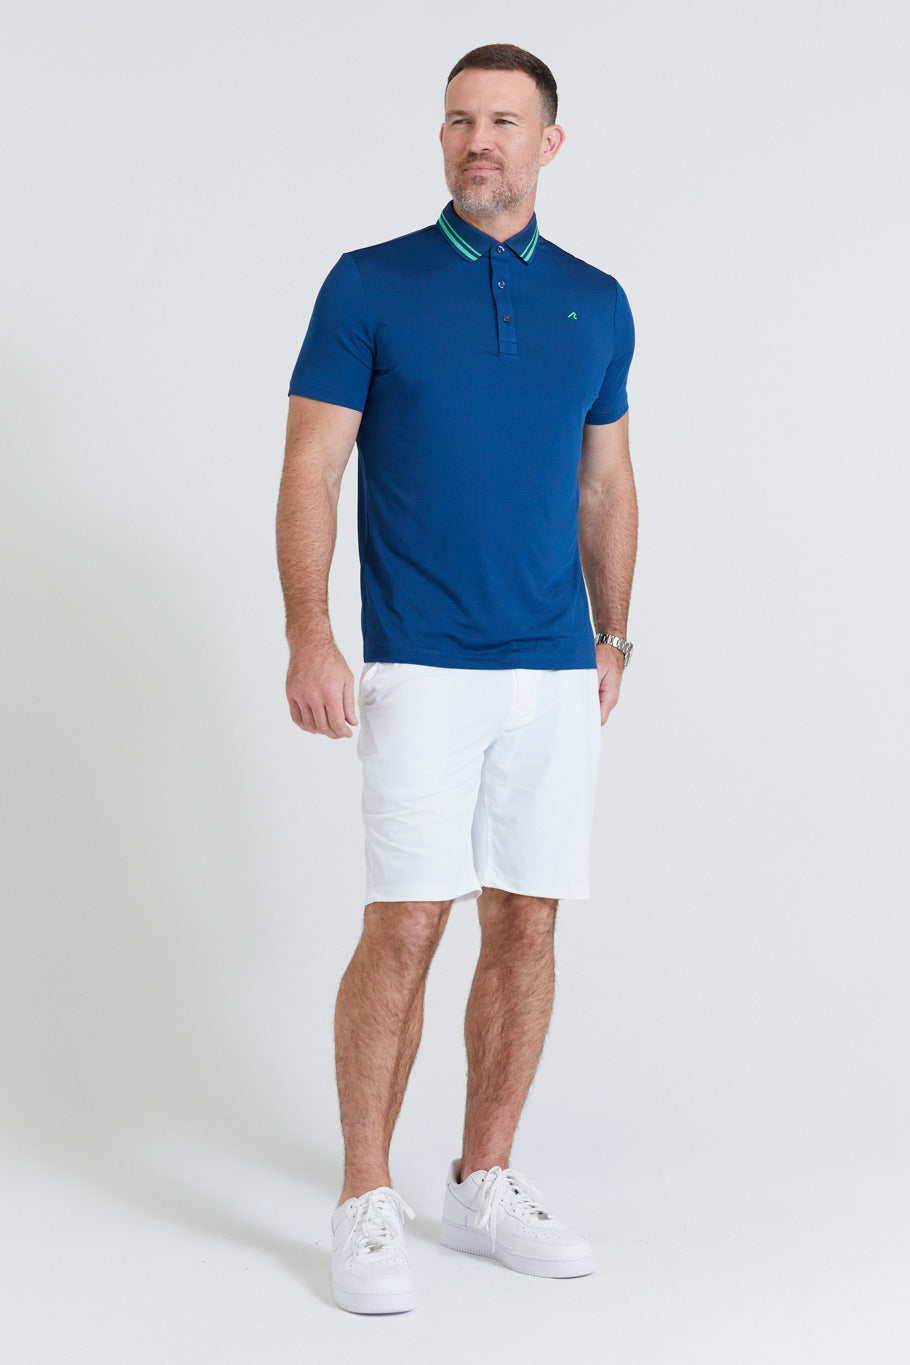 Image of the cadman polo in admiral ss23